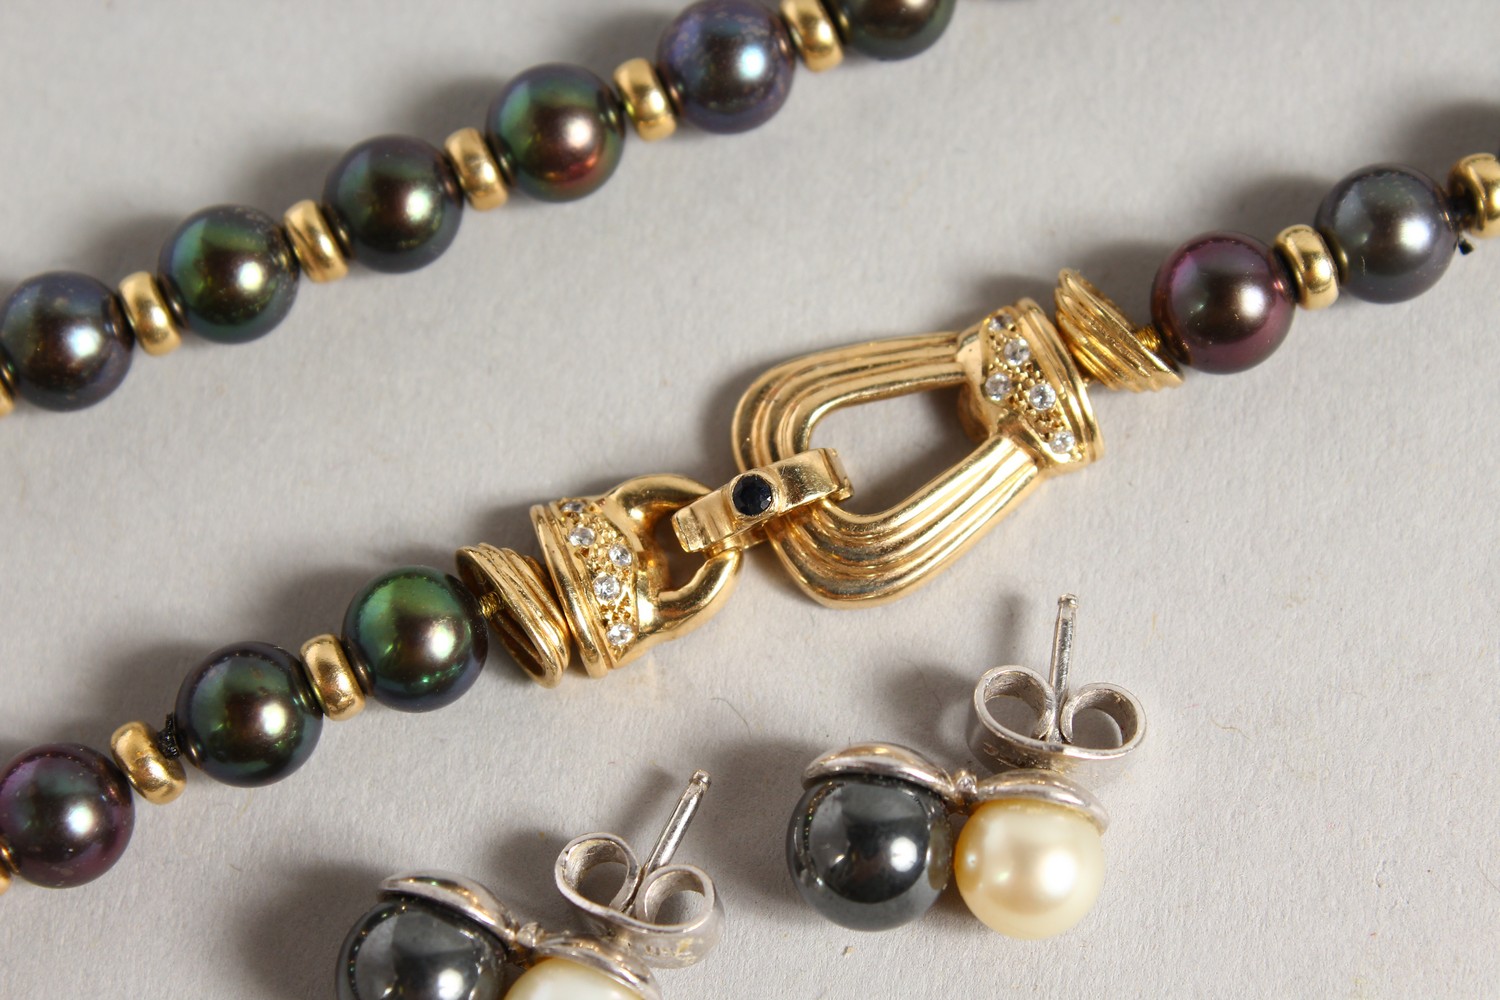 A GOOD BLACK PEARL NECKLACE, with ornate gold and diamond clasp, with a pair of similar earrings. - Image 3 of 5